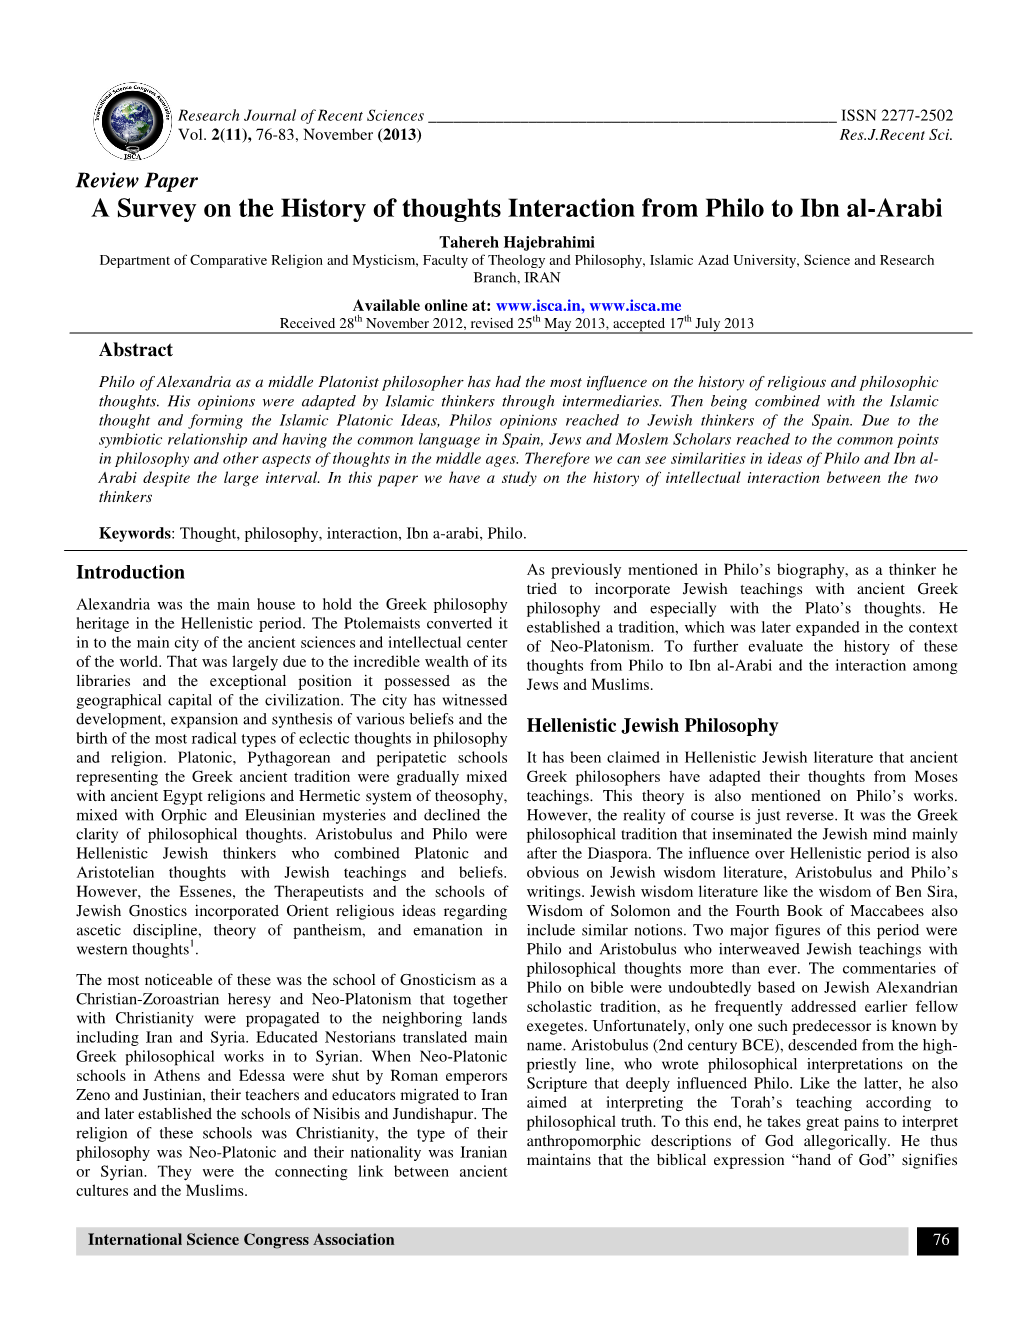 A Survey on the History of Thoughts Interaction from Philo to Ibn Al-Arabi